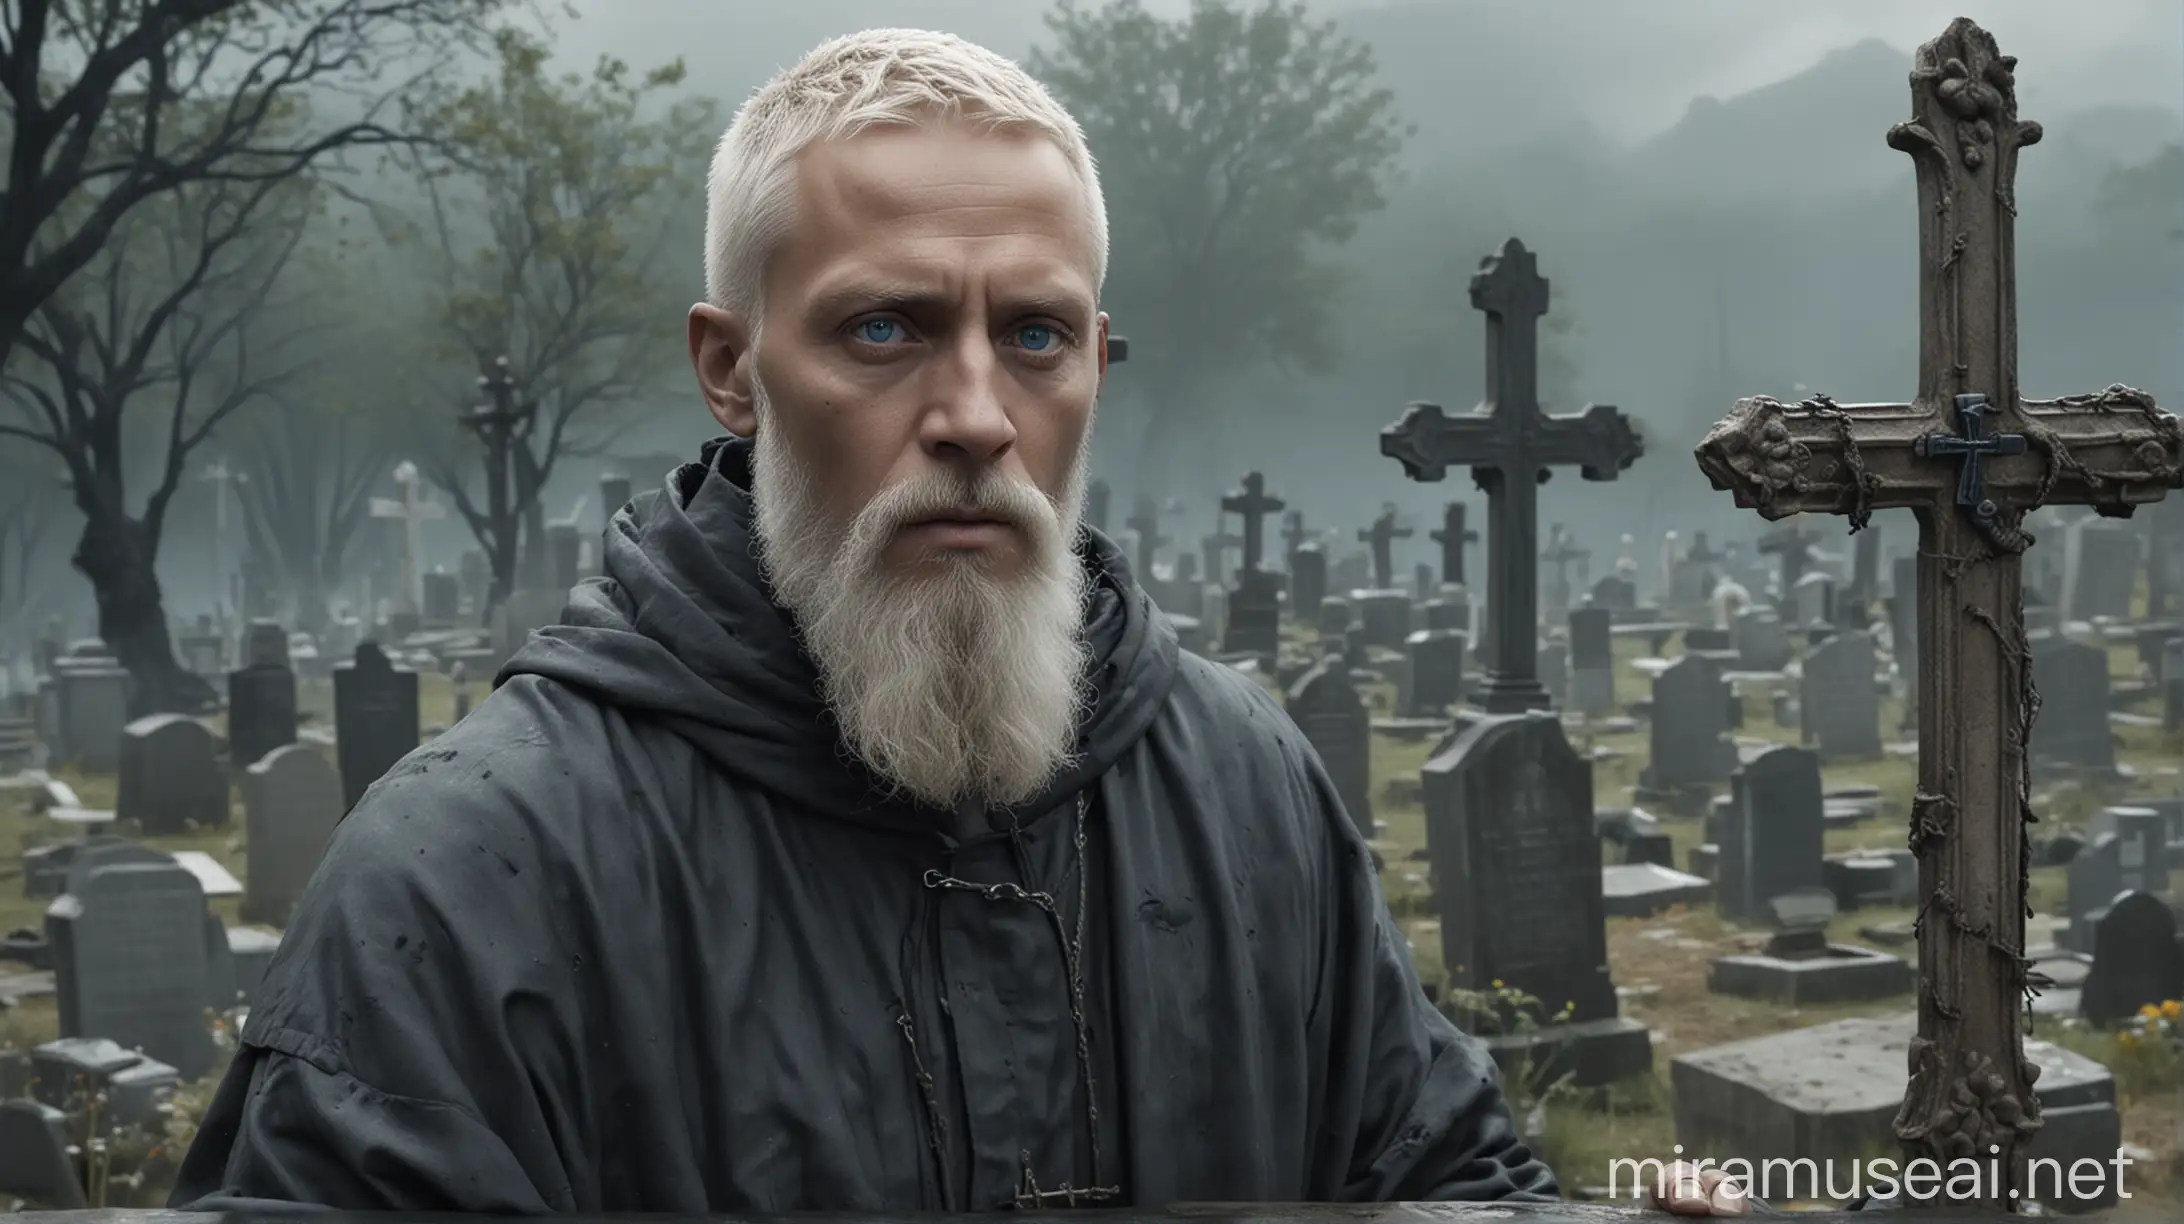  
Dominican monk with blue eyes, beard and blonde hair with gray hair is visiting a grave in a cemetery with a cross on top in an apocalyptic setting, 21st century, hiperrealistyc